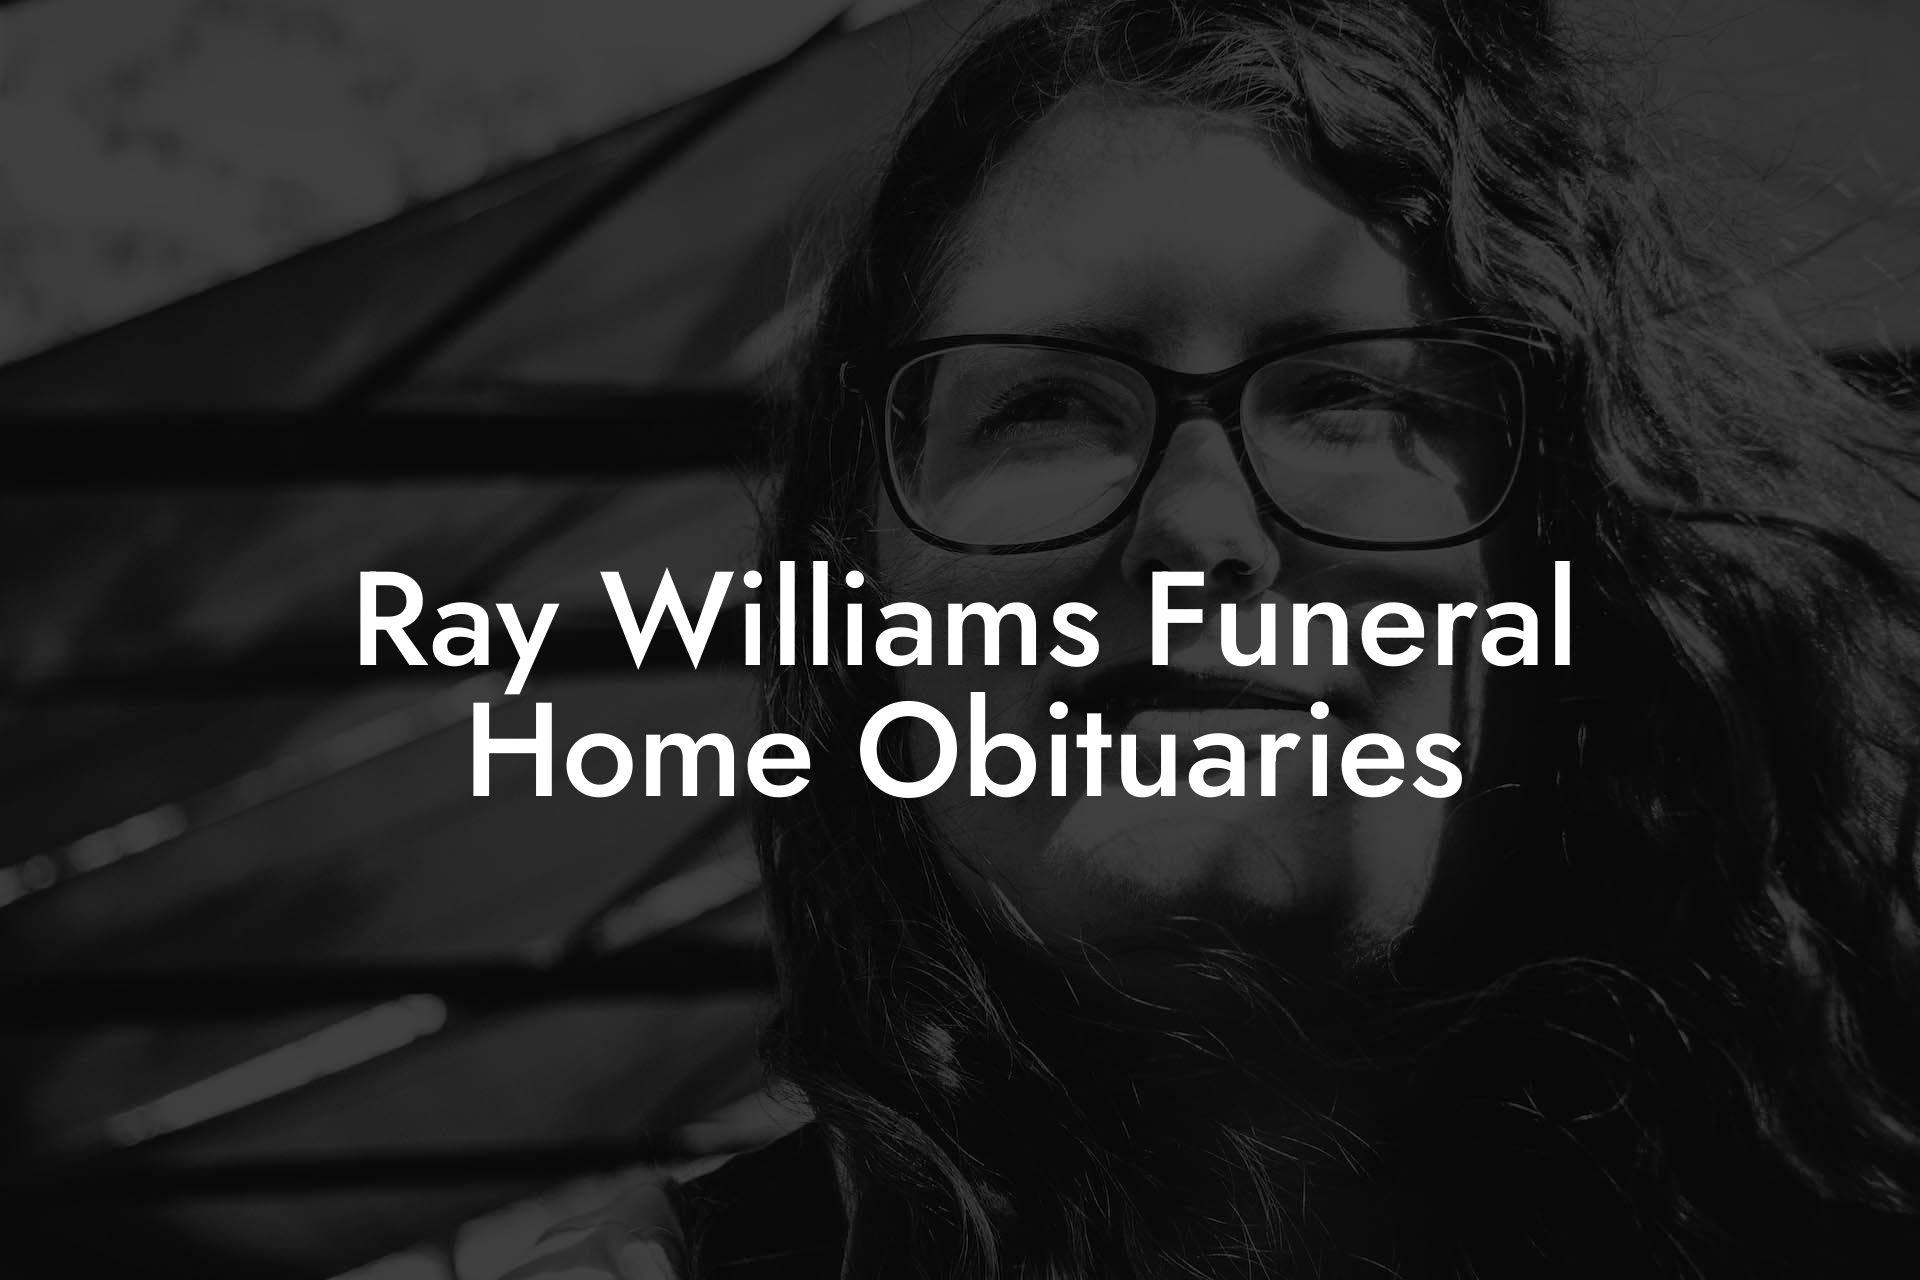 Ray Williams Funeral Home Obituaries